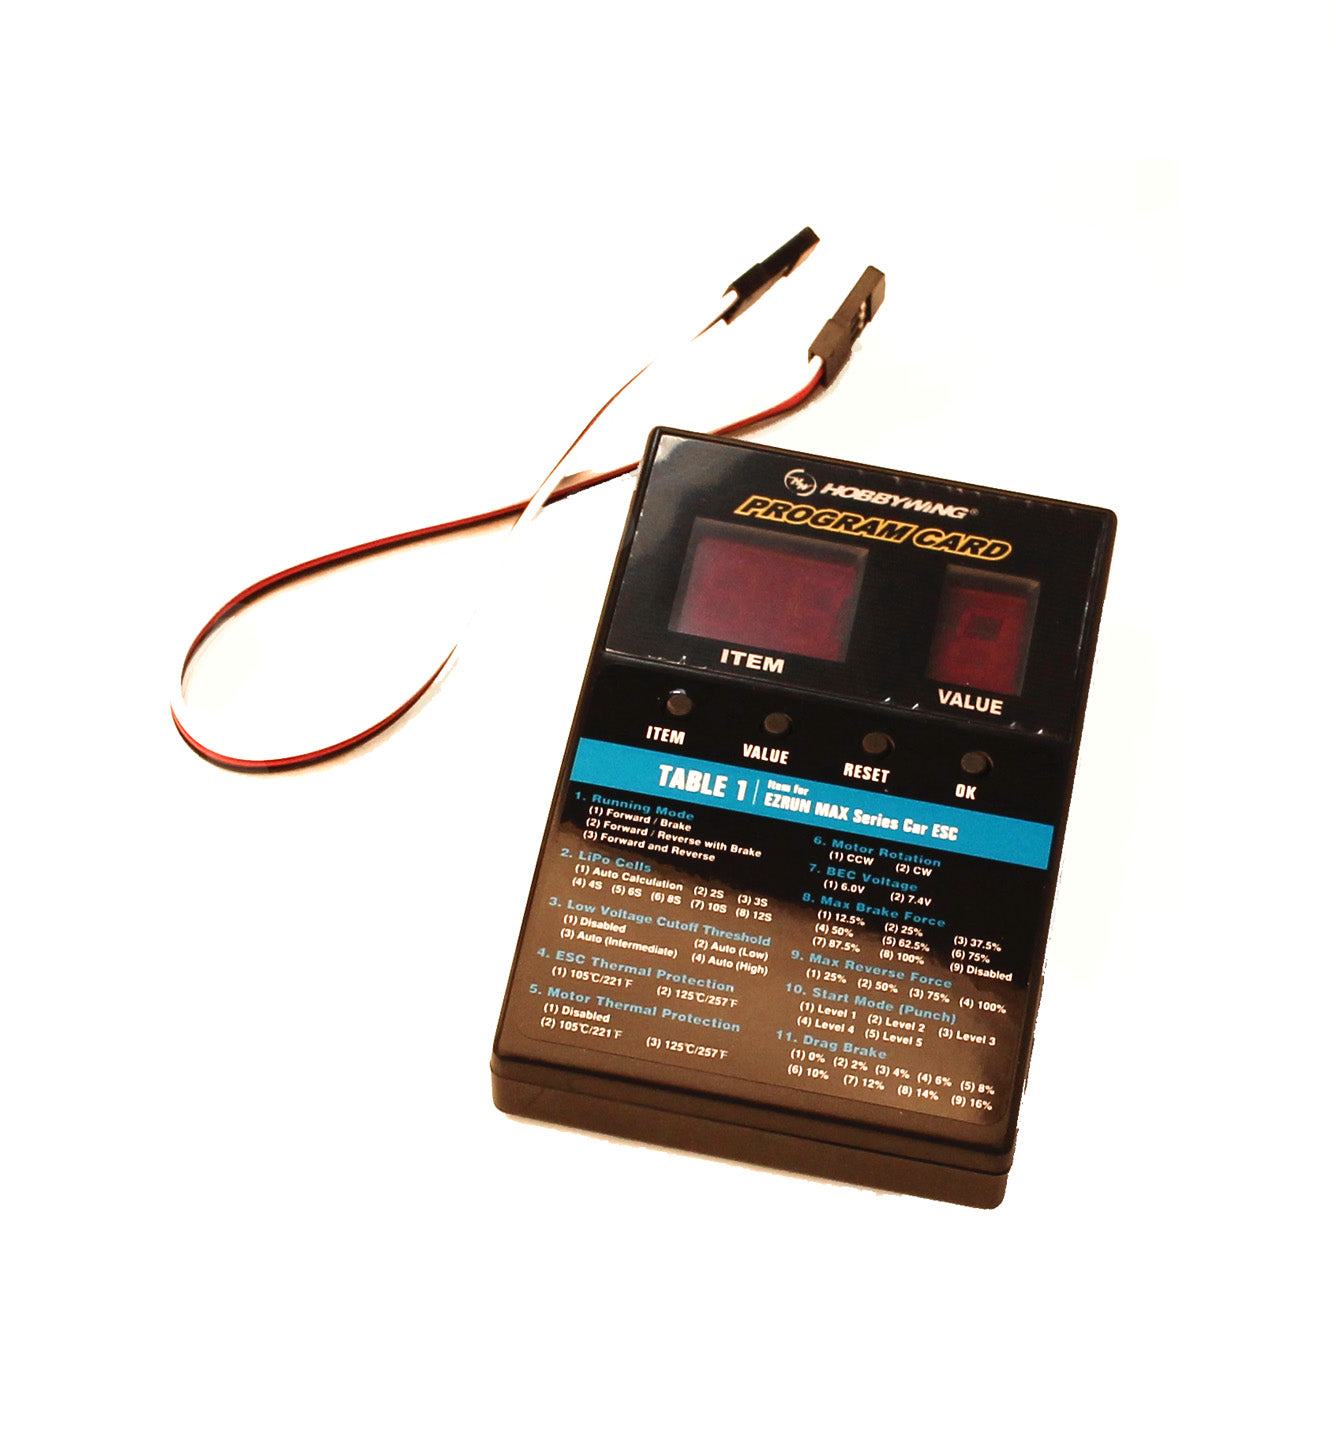 LED Program Card - General Use for Cars, Boats, and Air